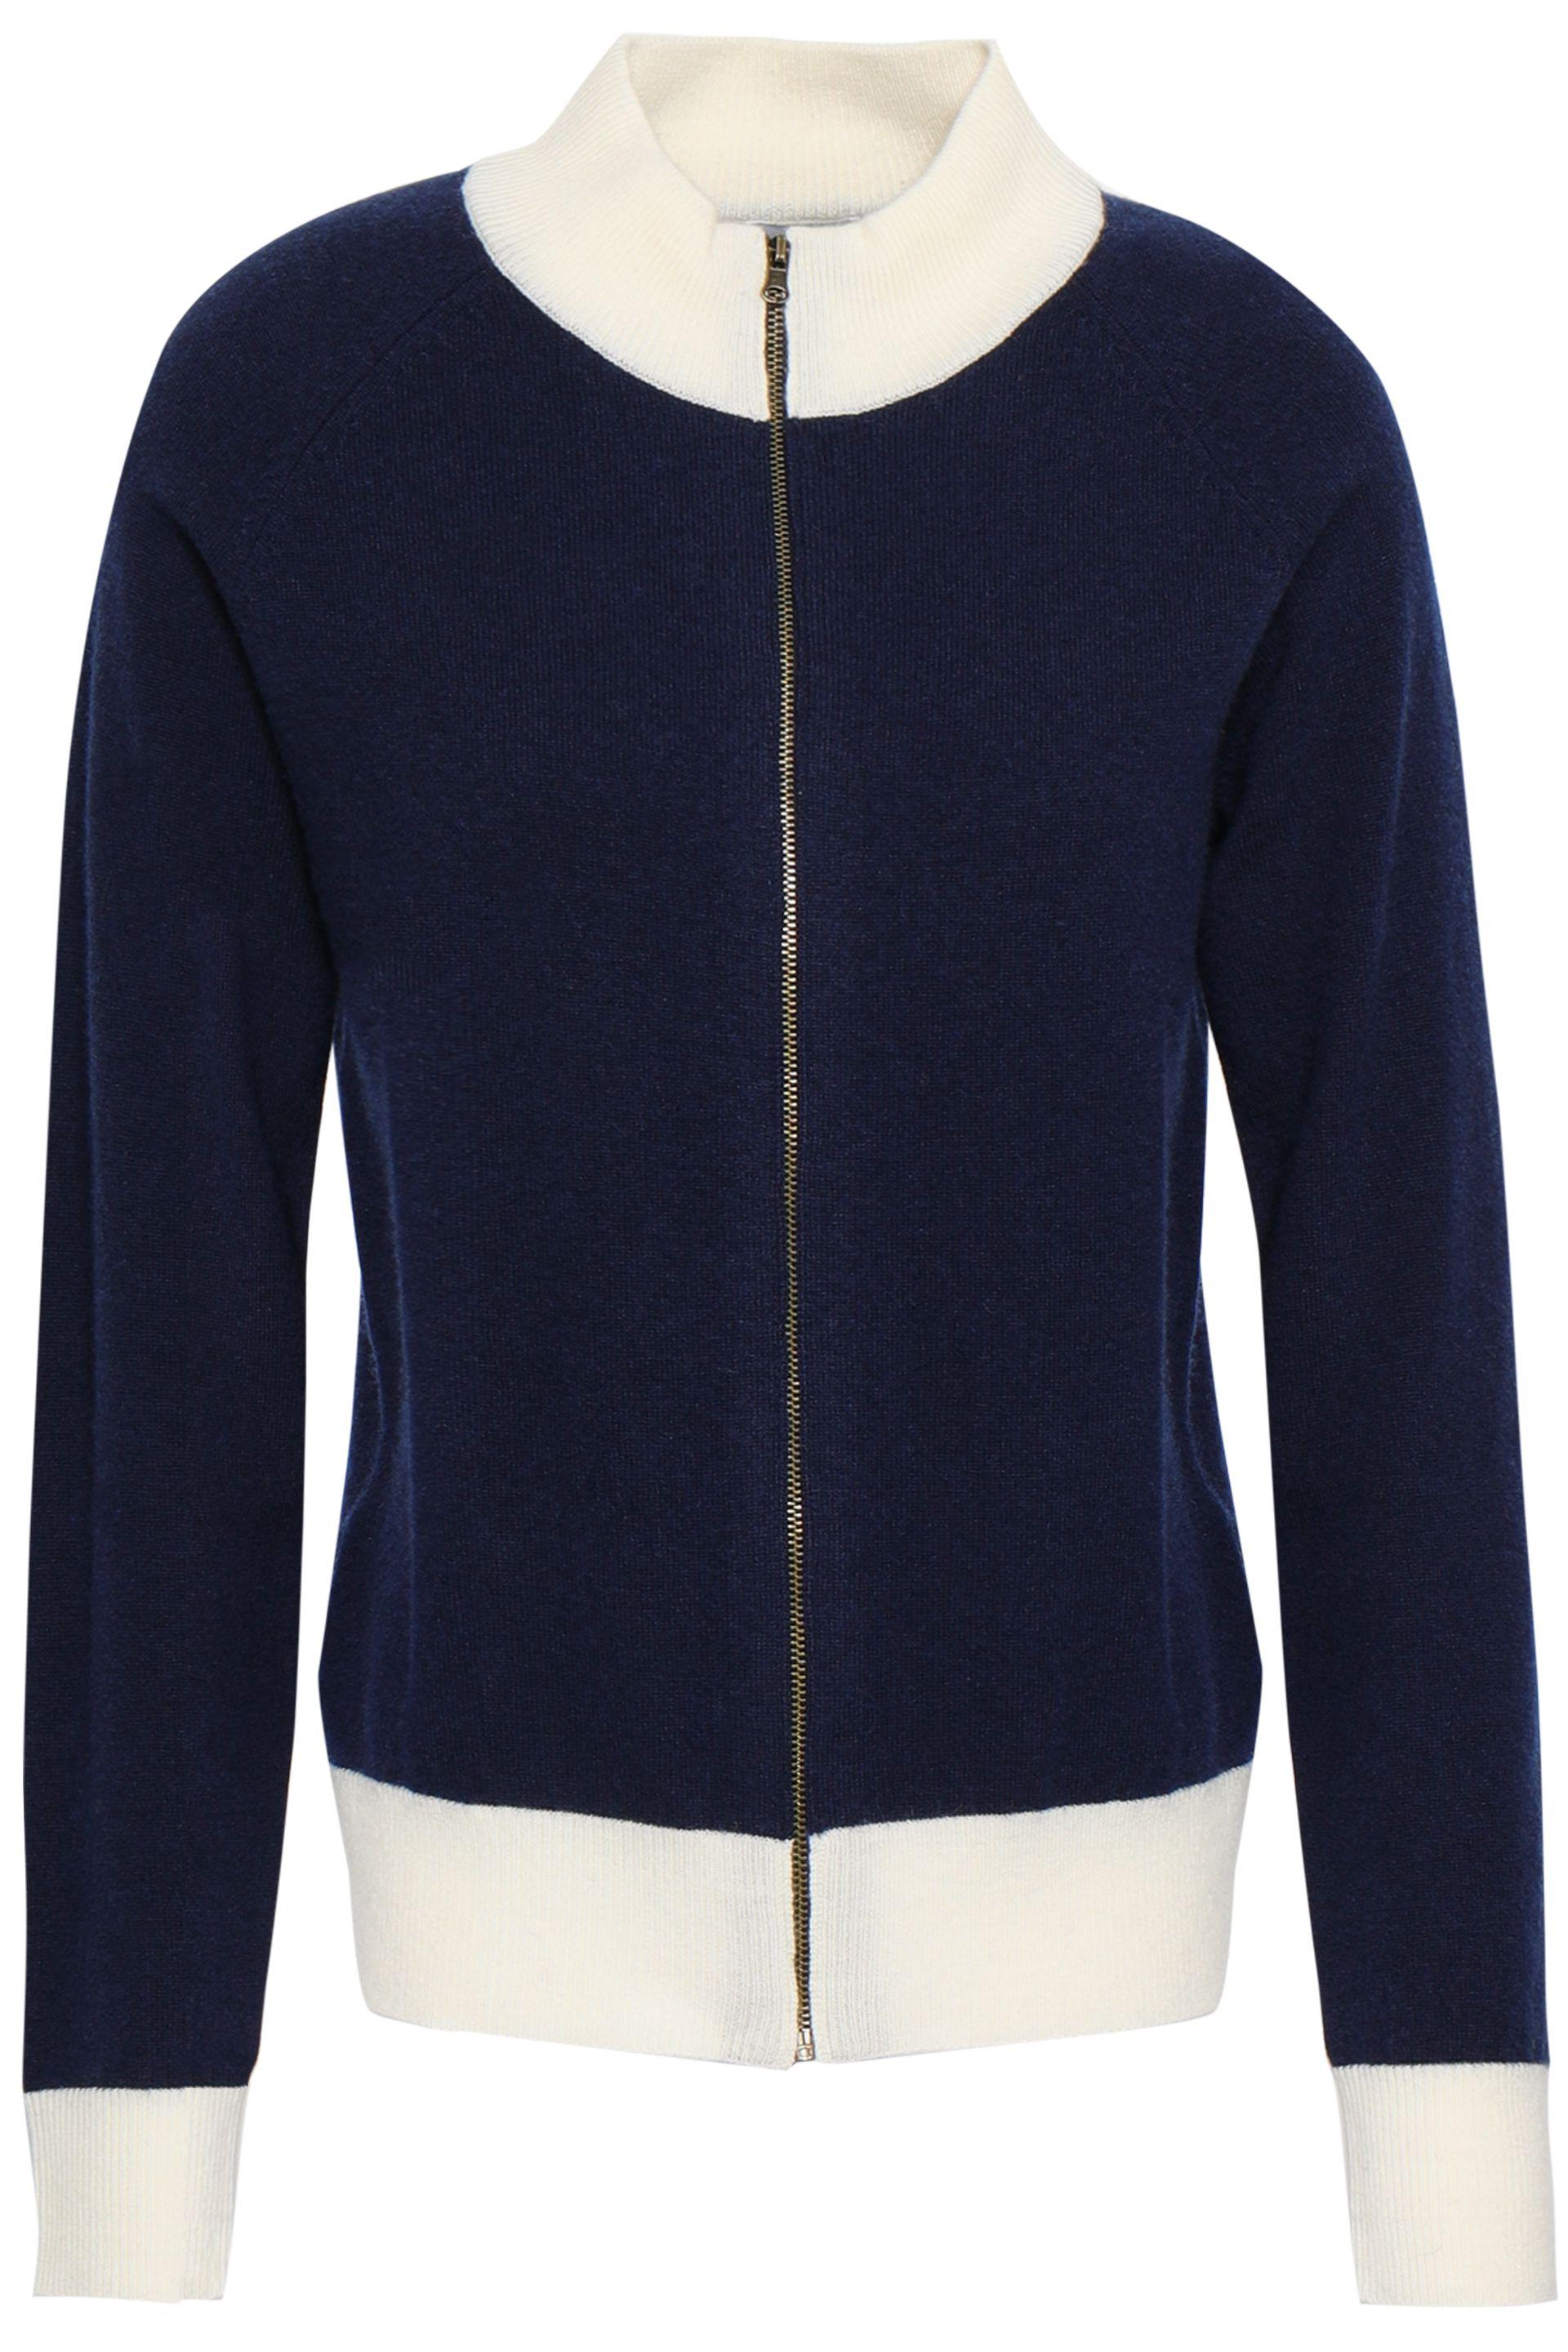 Madeleine Thompson Wool And Cashmere-blend Cardigan Midnight Blue in ...